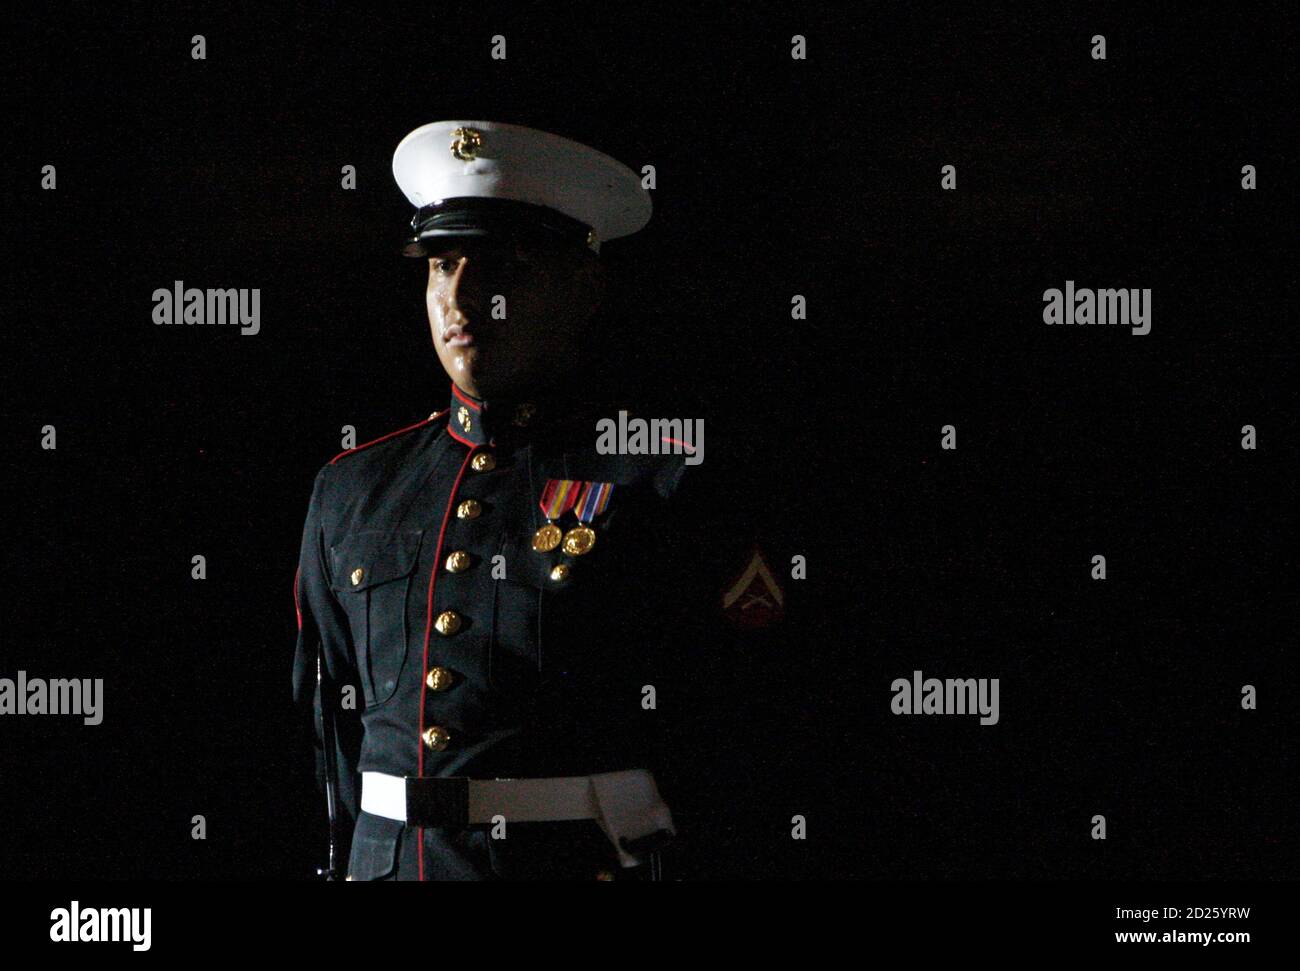 A member of the U.S. Marines Corps Silent Drill Exhibition Platoon takes part in the Evening Parade at the Marine Barracks in Washington, July 24, 2009.   REUTERS/Jim Young    (UNITED STATES POLITICS MILITARY) Stock Photo